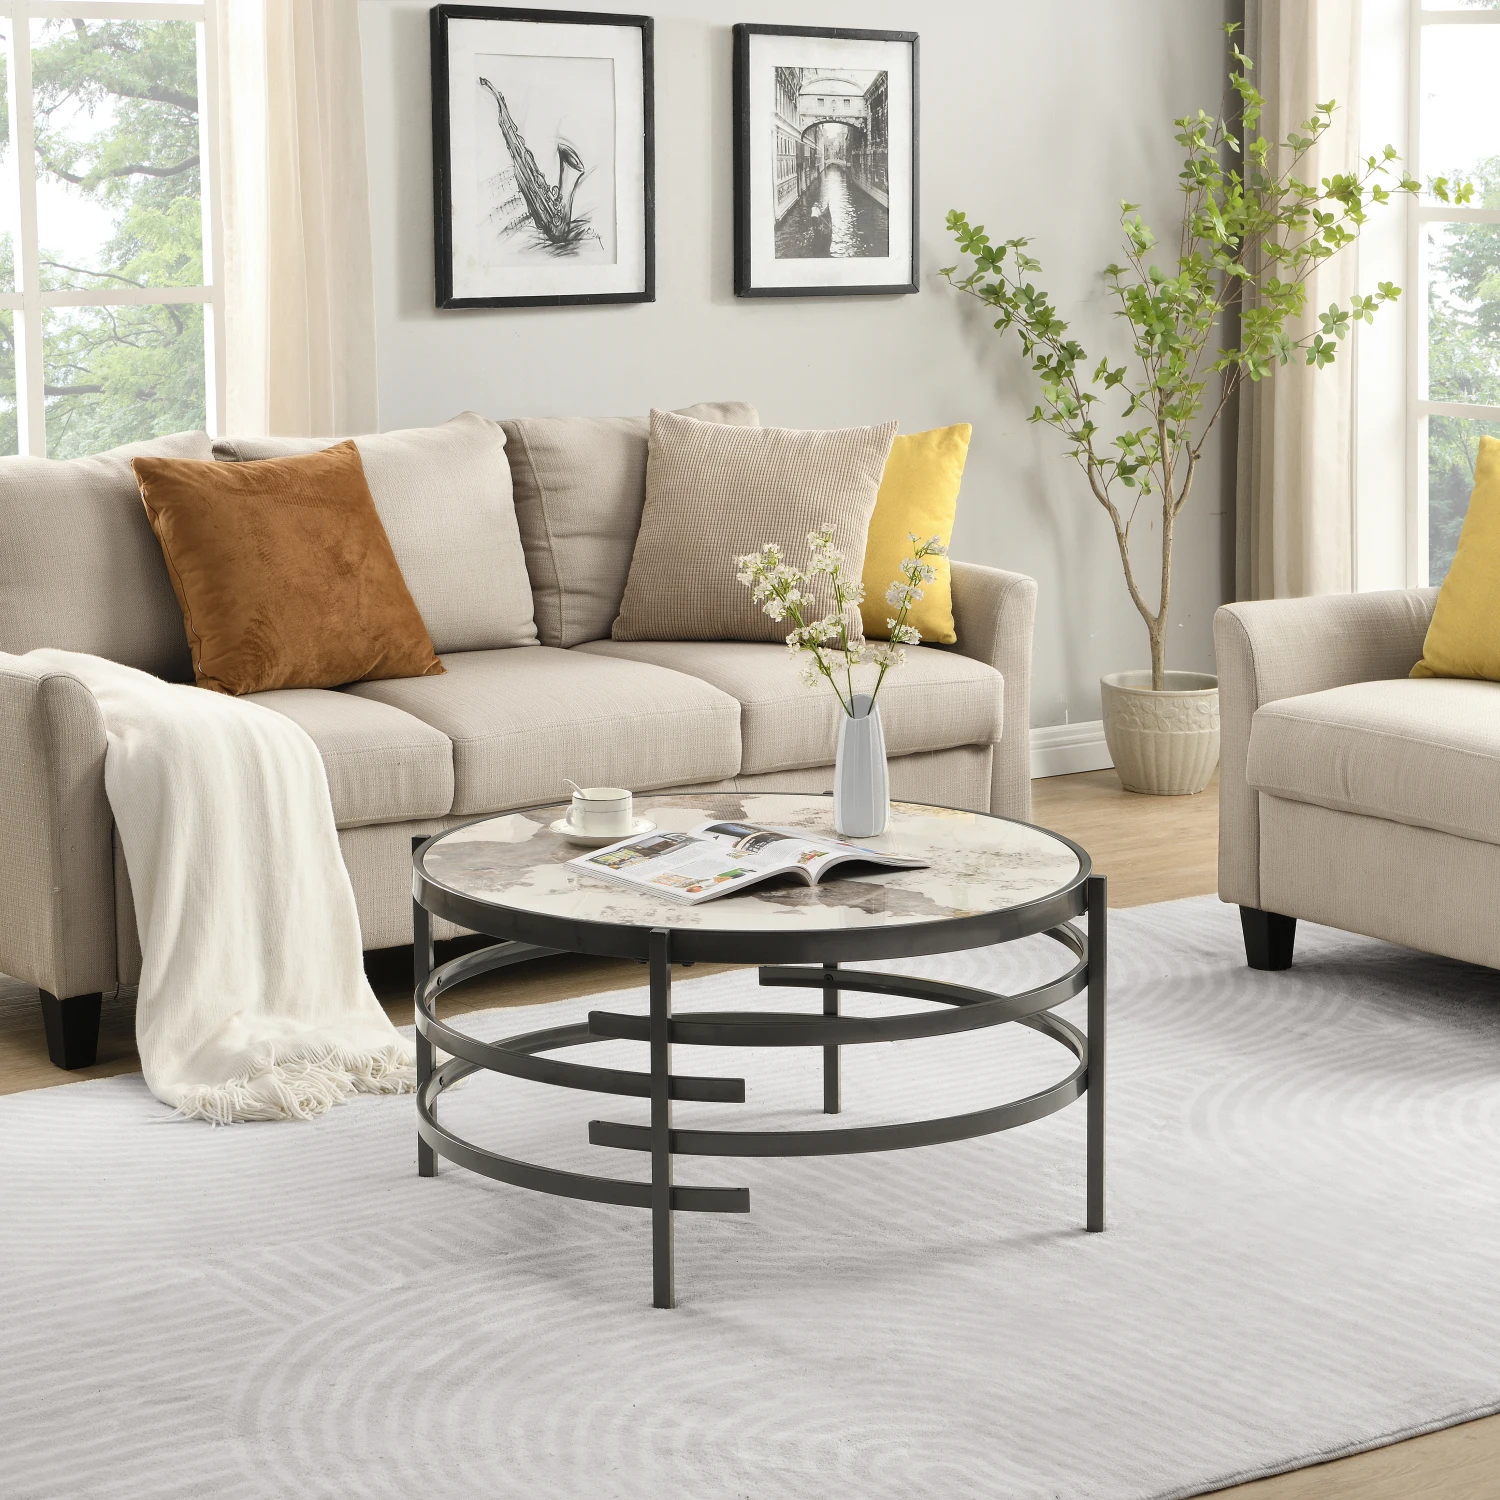 

Modern Darker Gray Round Coffee Table With Sturdy Metal Frame and Sintered Stone Top, Perfect for Living Room Decor, 32.48'' Dia